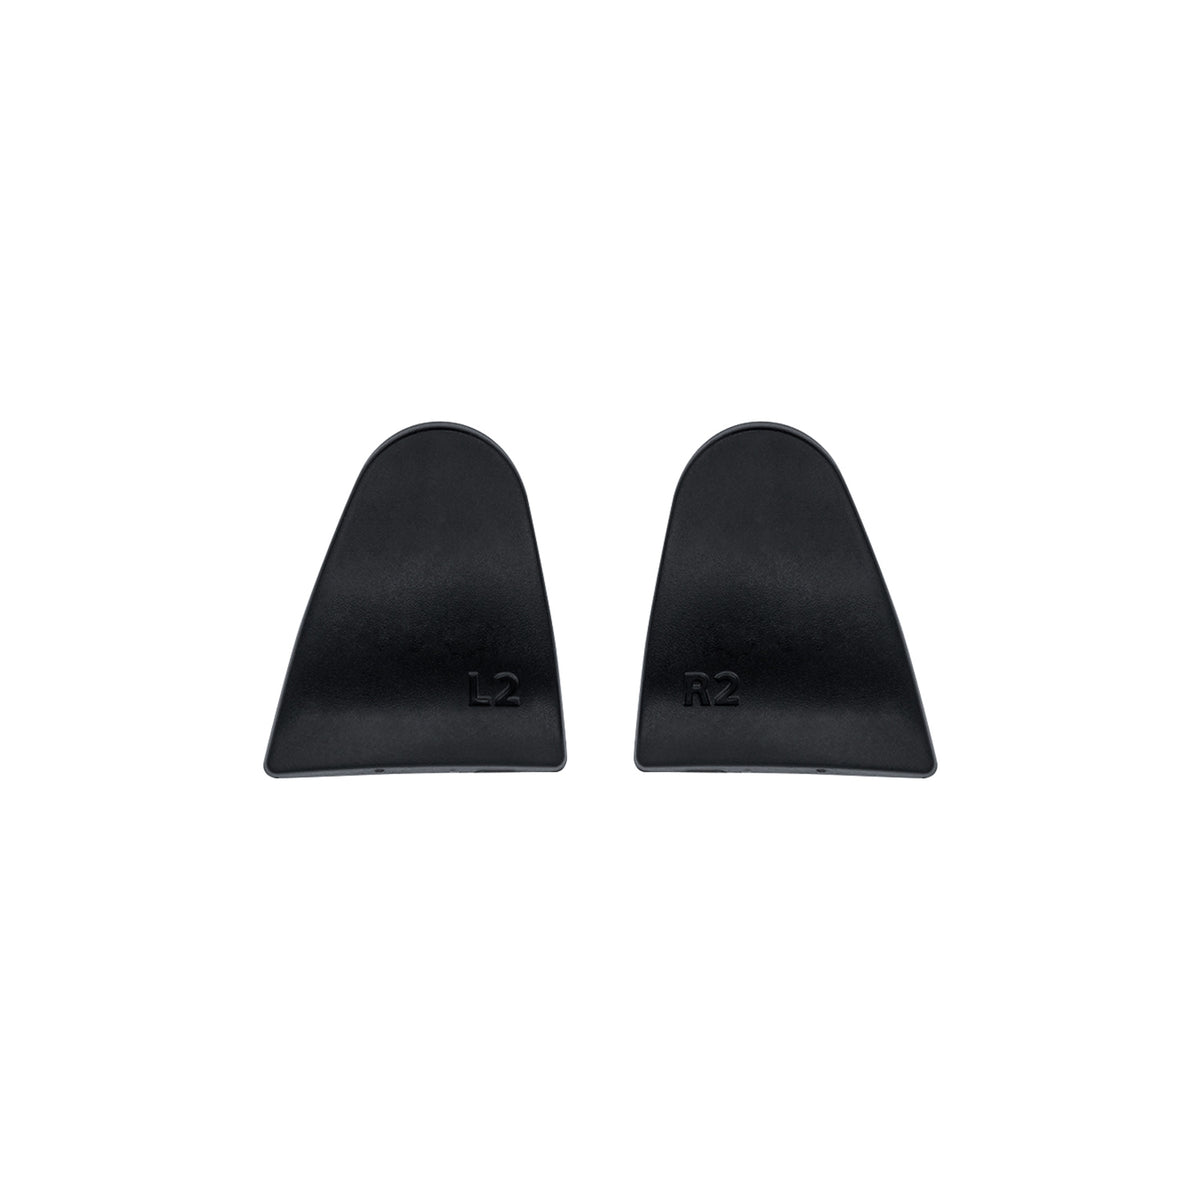 High Quality Black L2 R2 Trigger Button Extenders For PS5 Game Controllers  Fast Asos From Gamingarea, $32.86